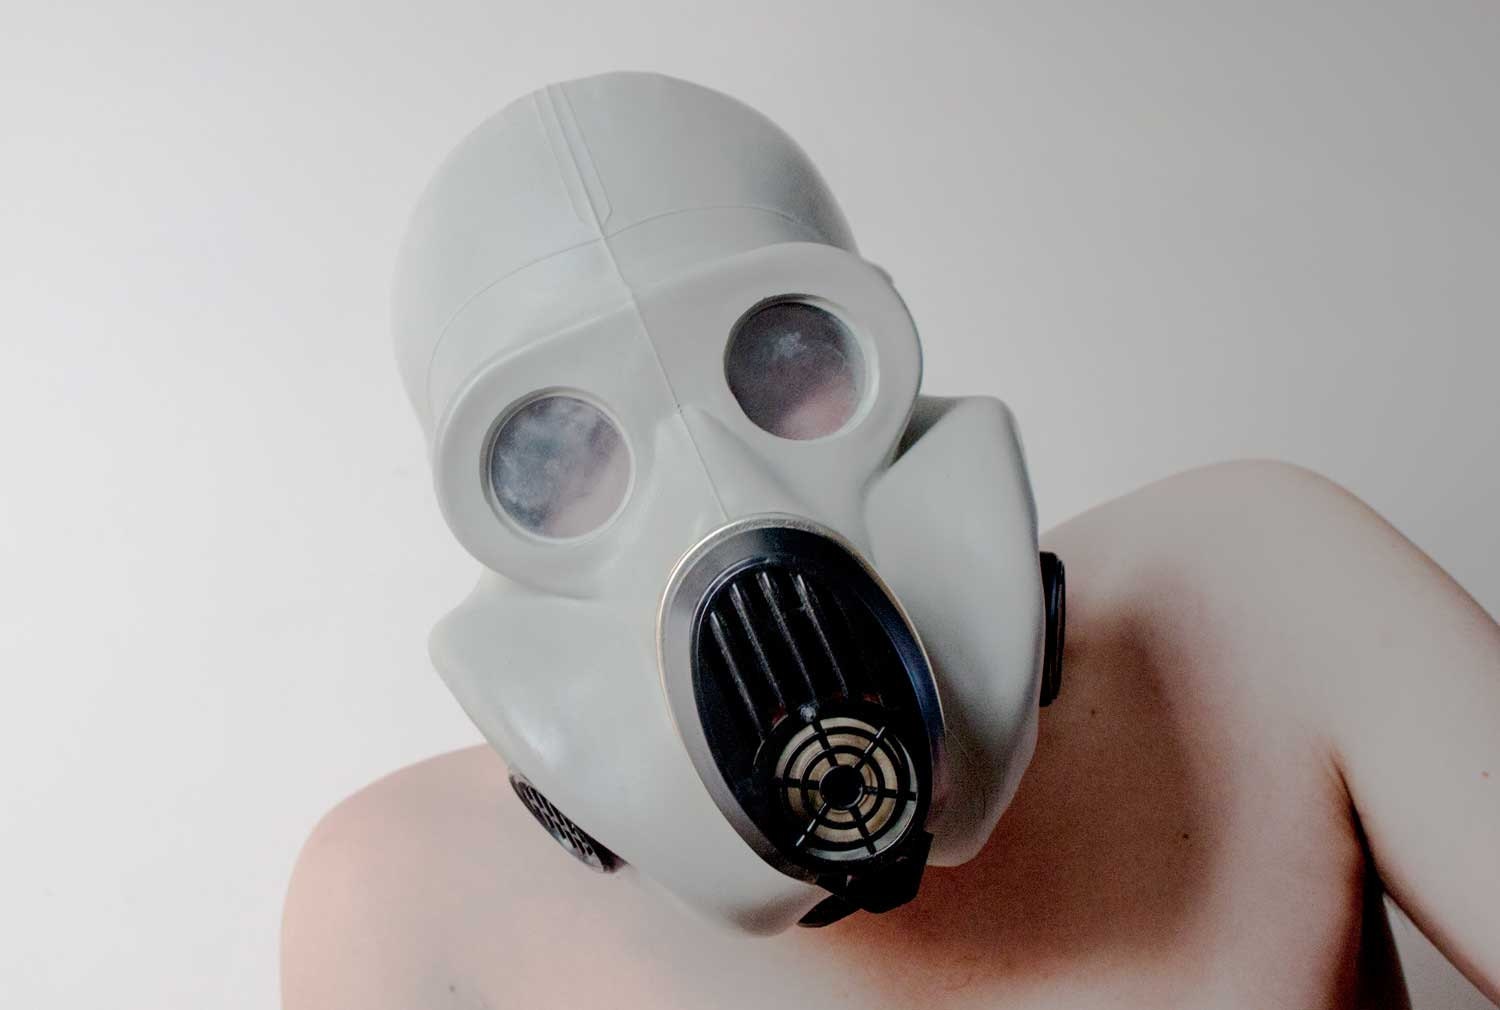 pbf gas mask filters